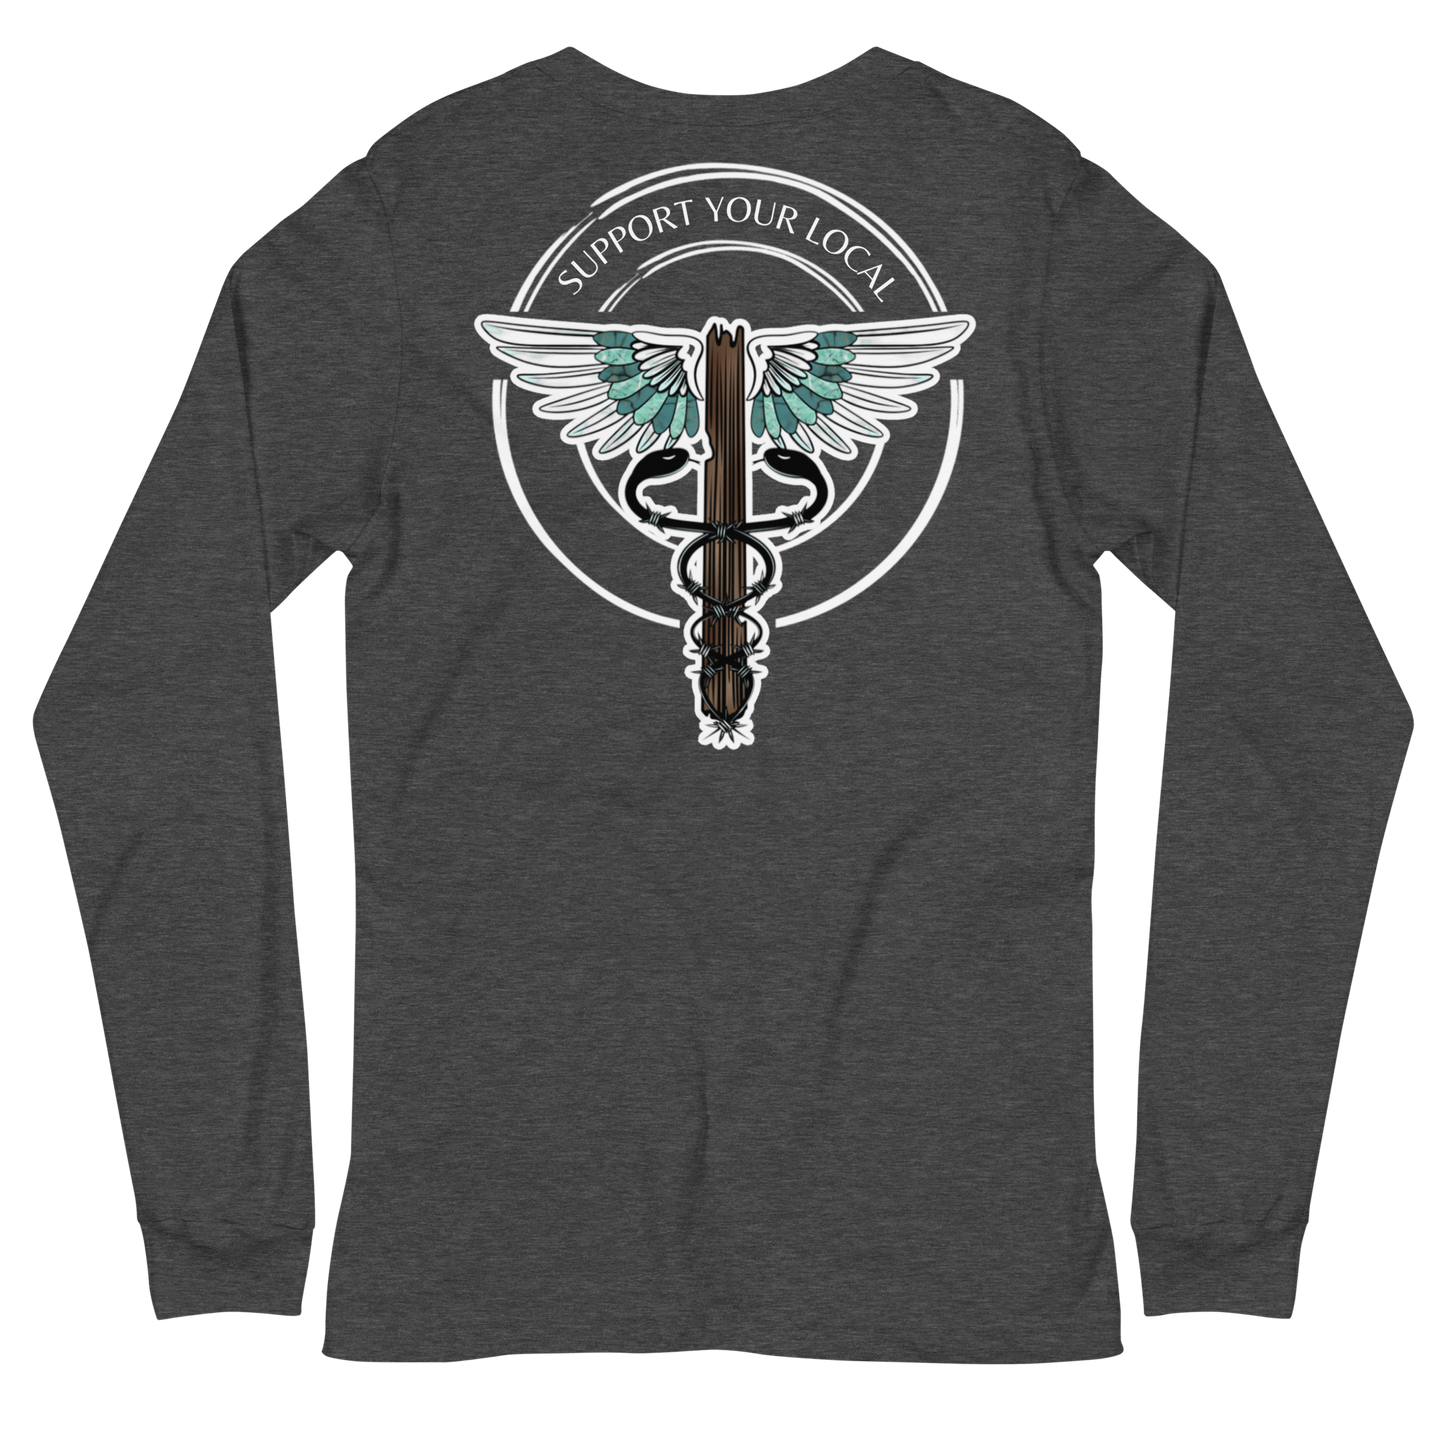 Support Your Local- Unisex Long Sleeve Tee Dark Colors